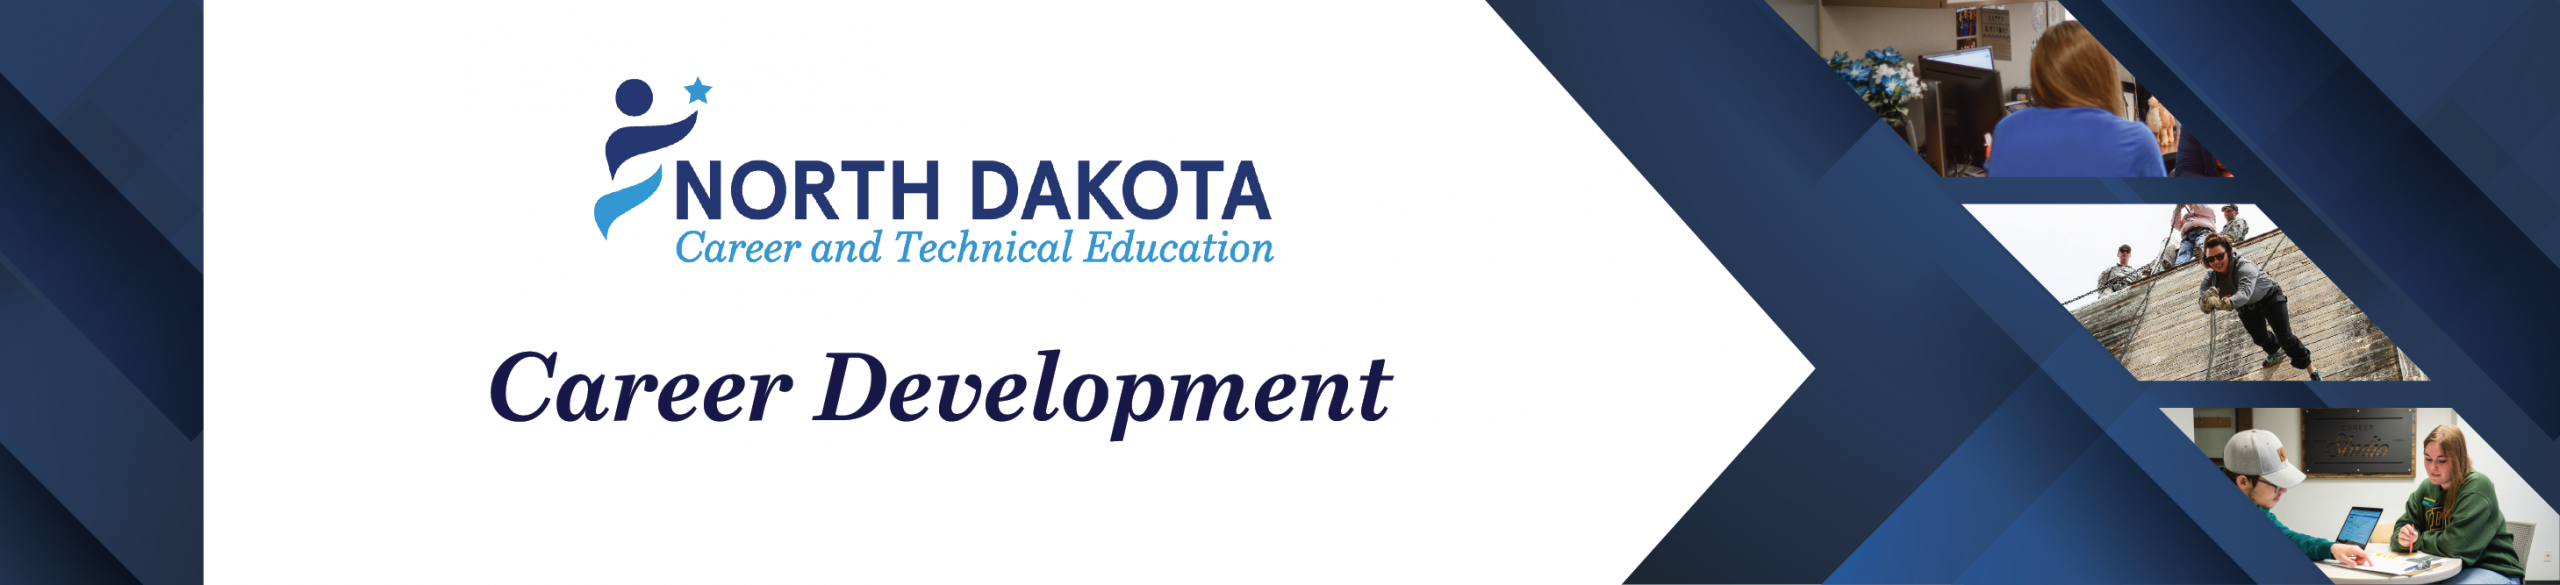 Career Development Banner with Images